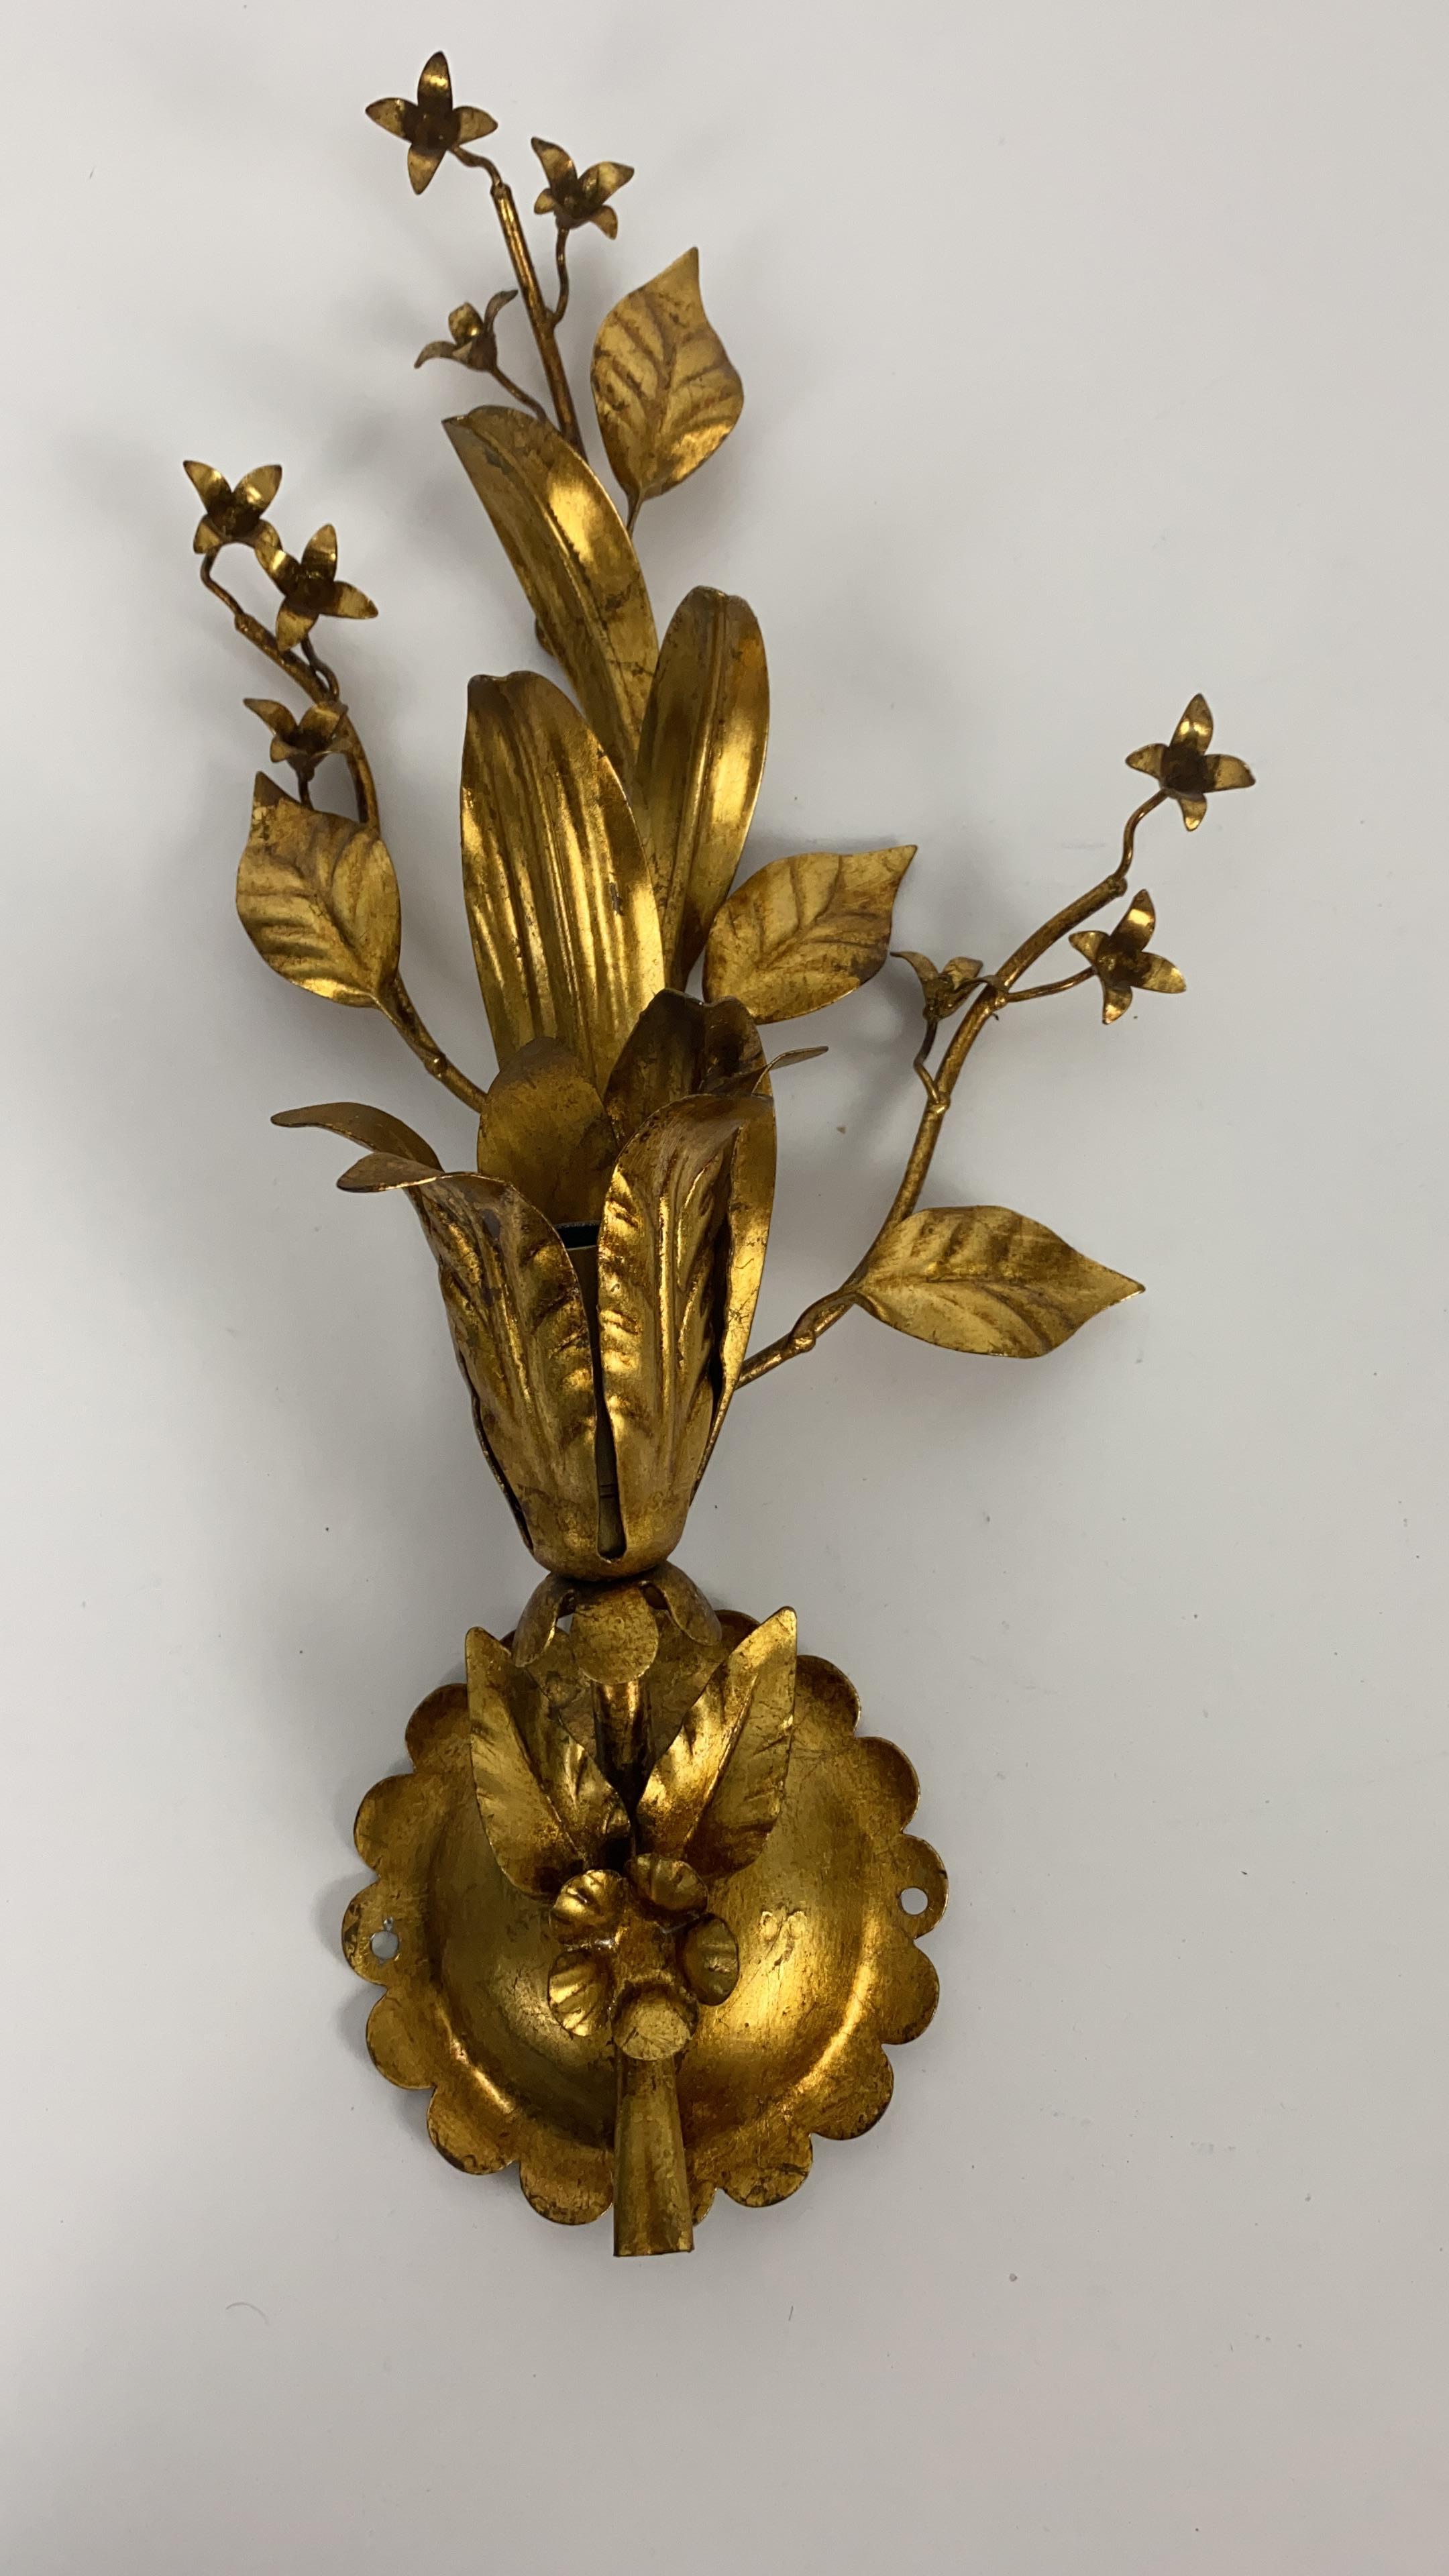 Italian Set of 2 Golden Florentine Flower Shape Wall Lamps by Banci, Italy, 1970s